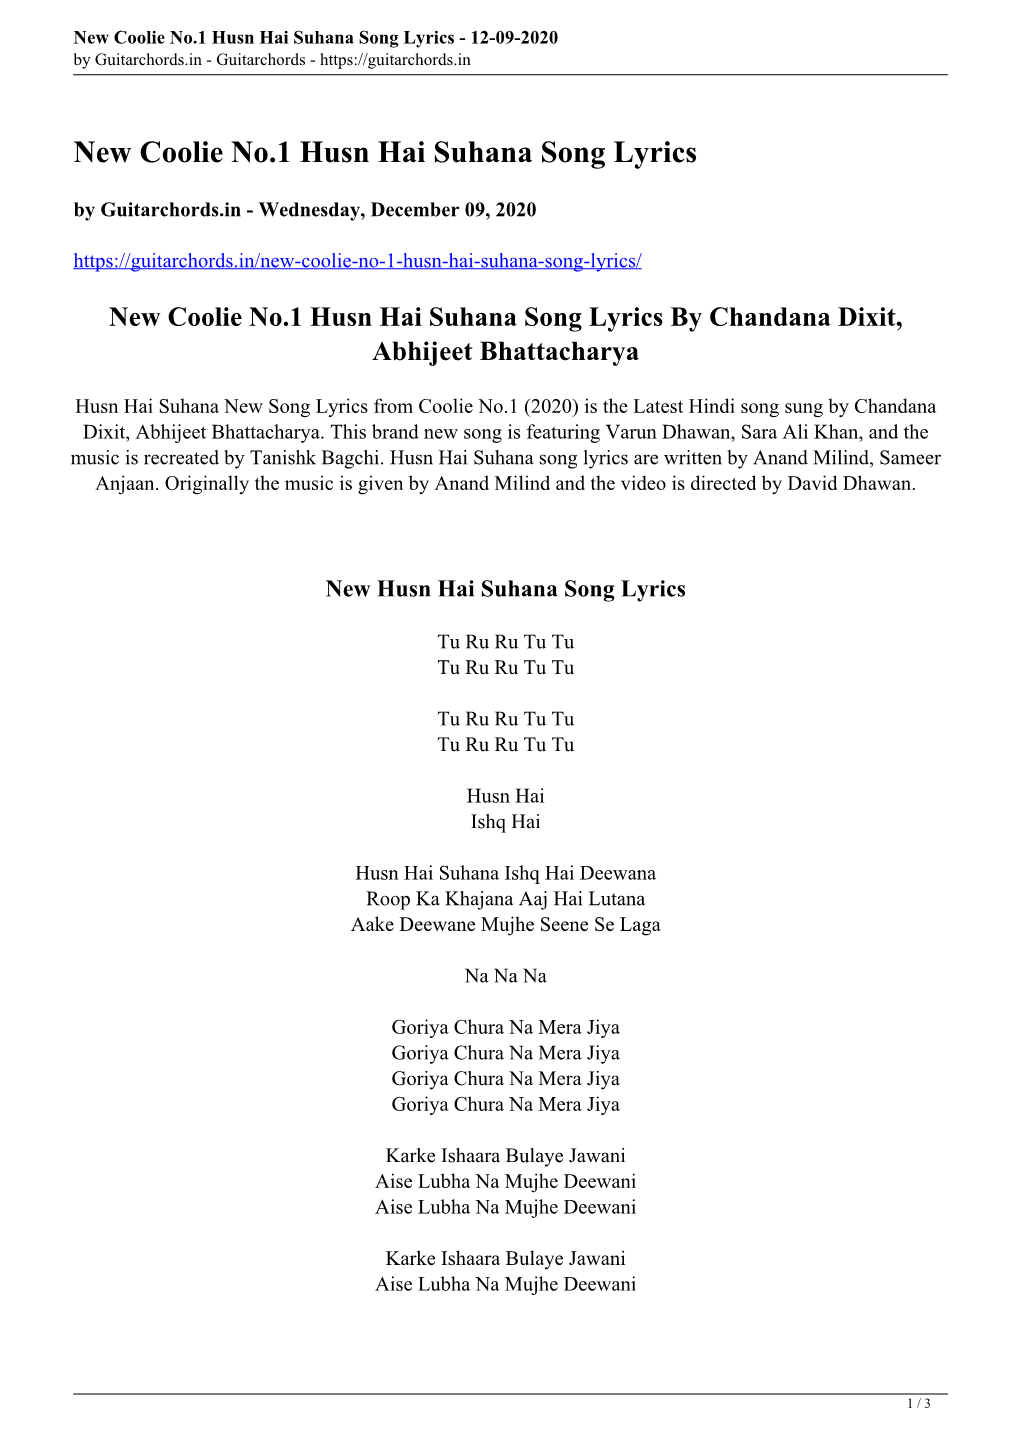 New Coolie No.1 Husn Hai Suhana Song Lyrics - 12-09-2020 by Guitarchords.In - Guitarchords